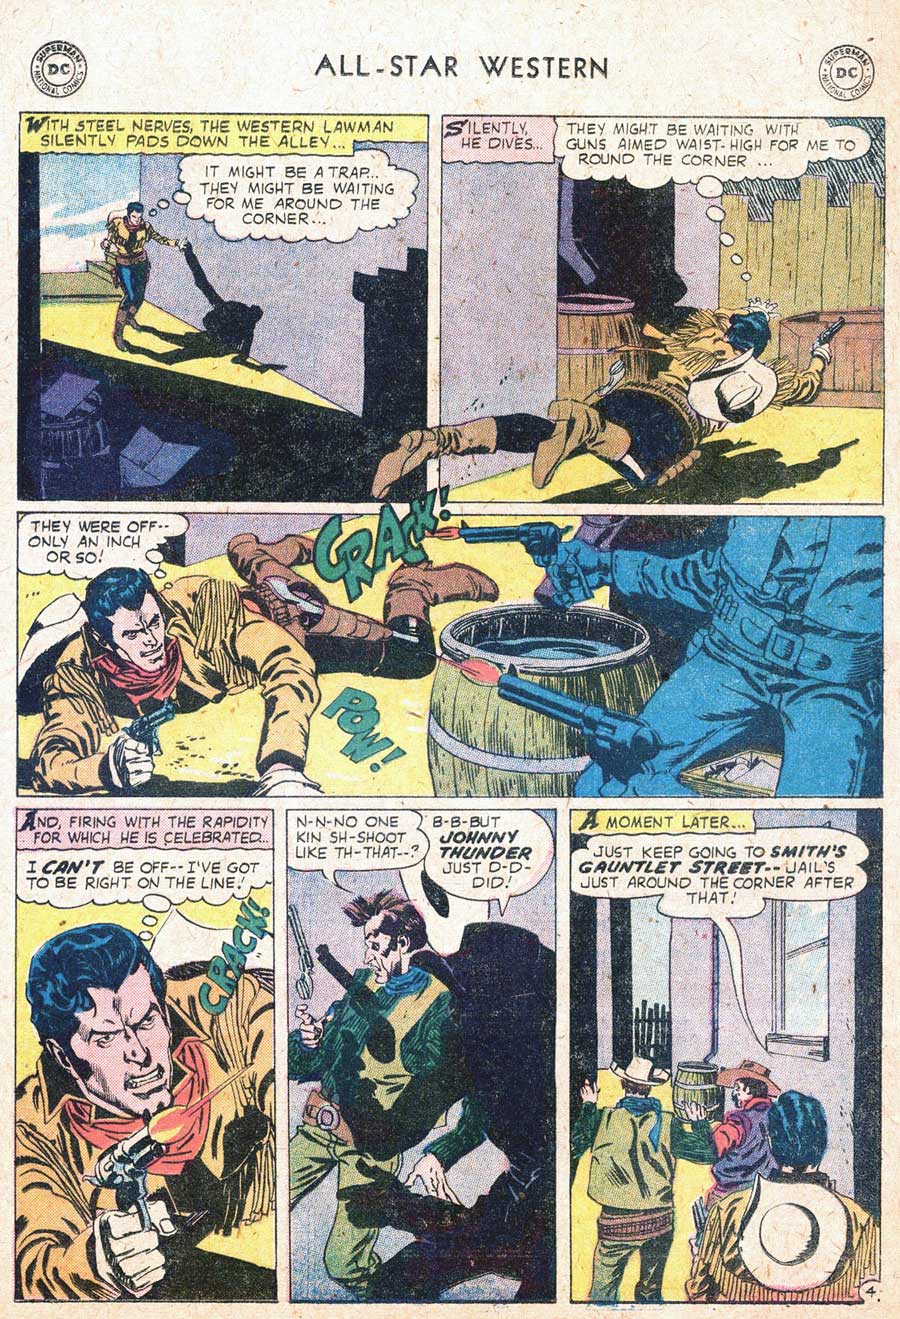 ALL-STAR WESTERN #104 featuring Johnny Thunder in, "The Gauntlet of Thunder" by Robert Kanigher and Gil Kane